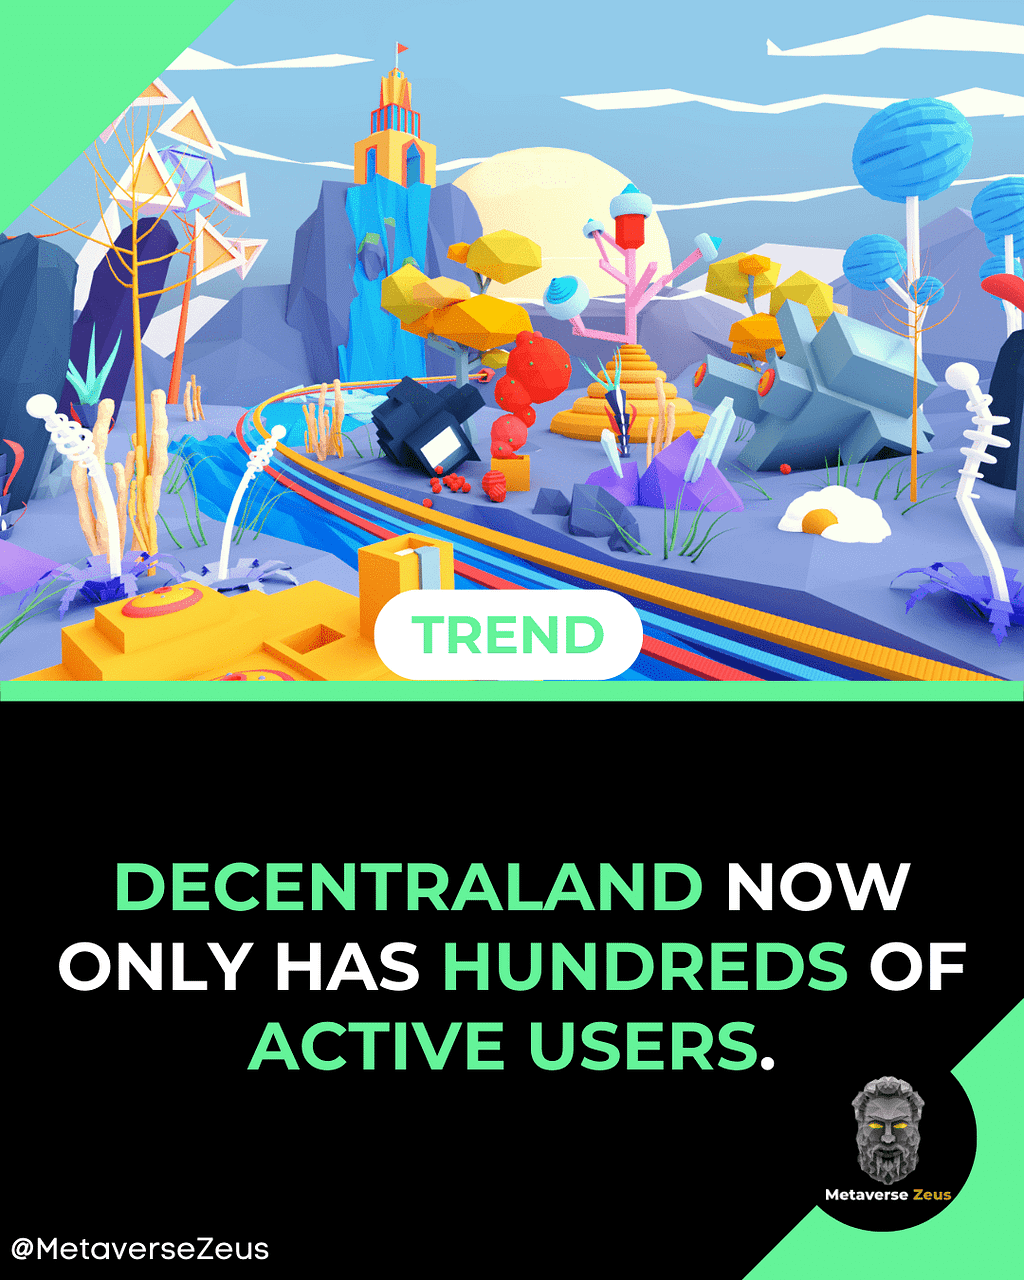 Decentraland now only has hundreds of active users.